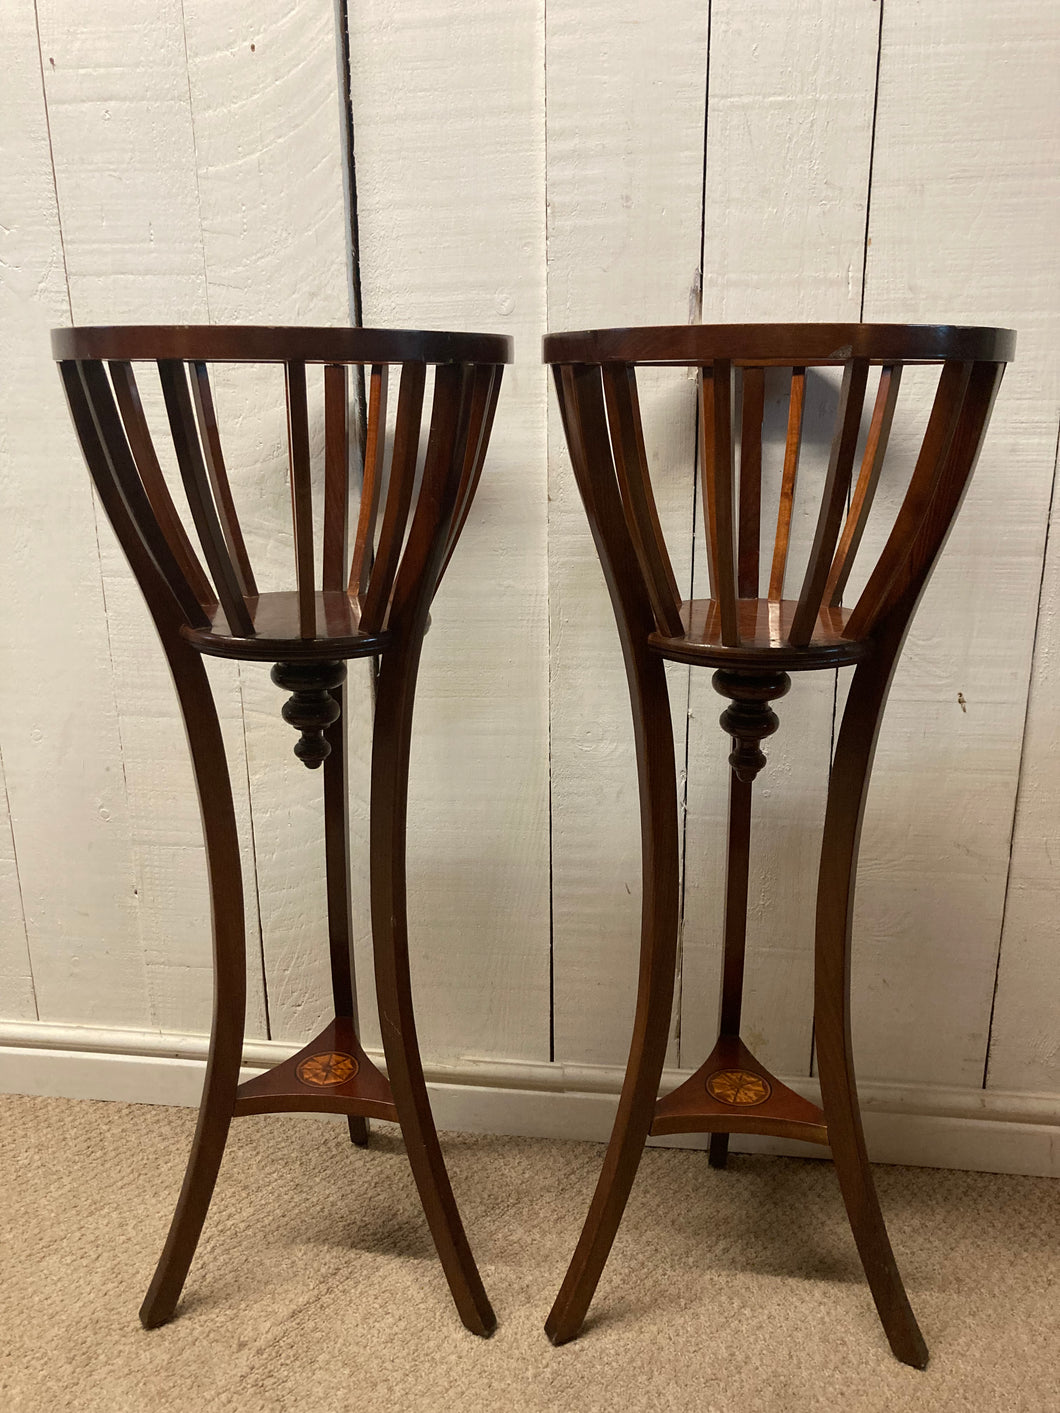 Edwardian Pair Of Mahogany Plant Stands With Inlaying Details